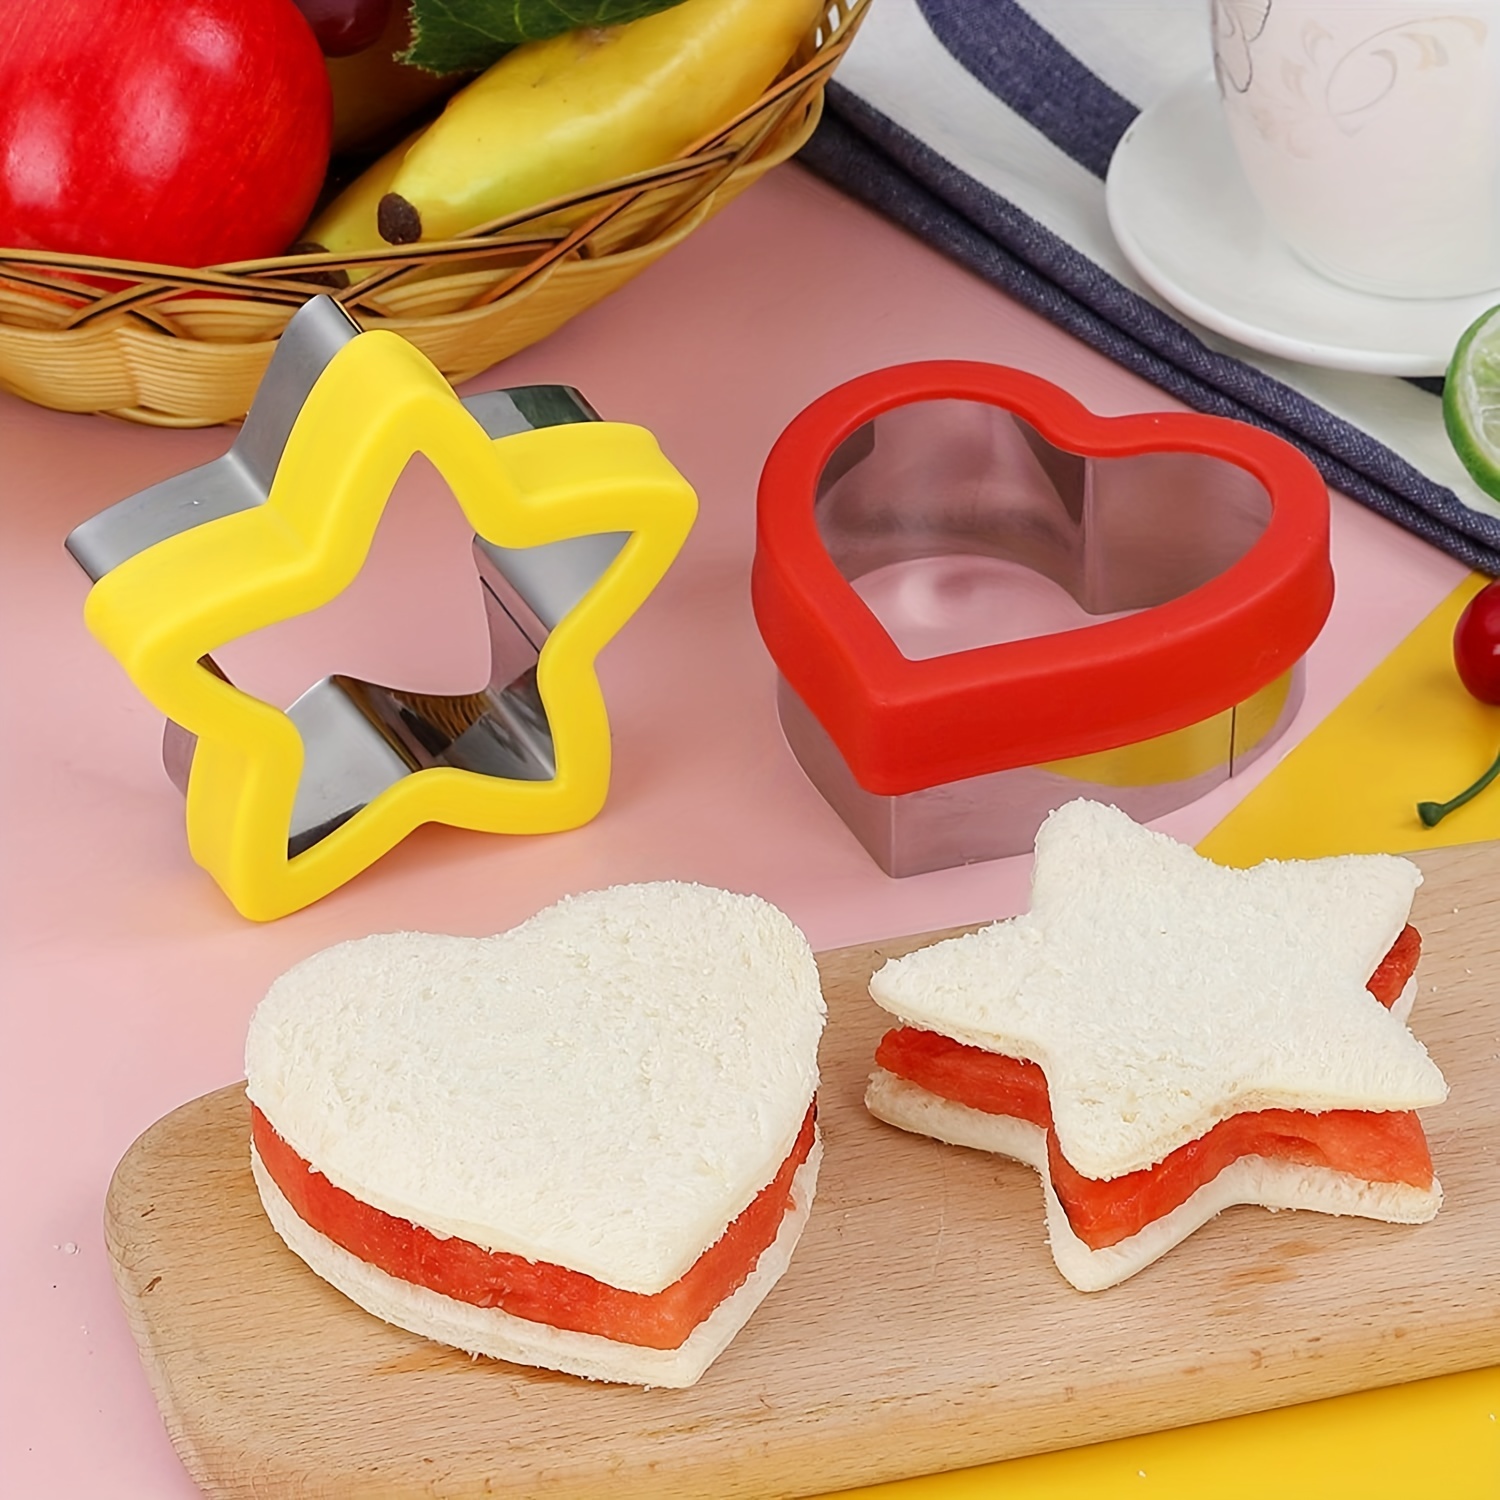 Stainless Steel Cutter Shapes Set, 9PCS Different Sizes Cookie